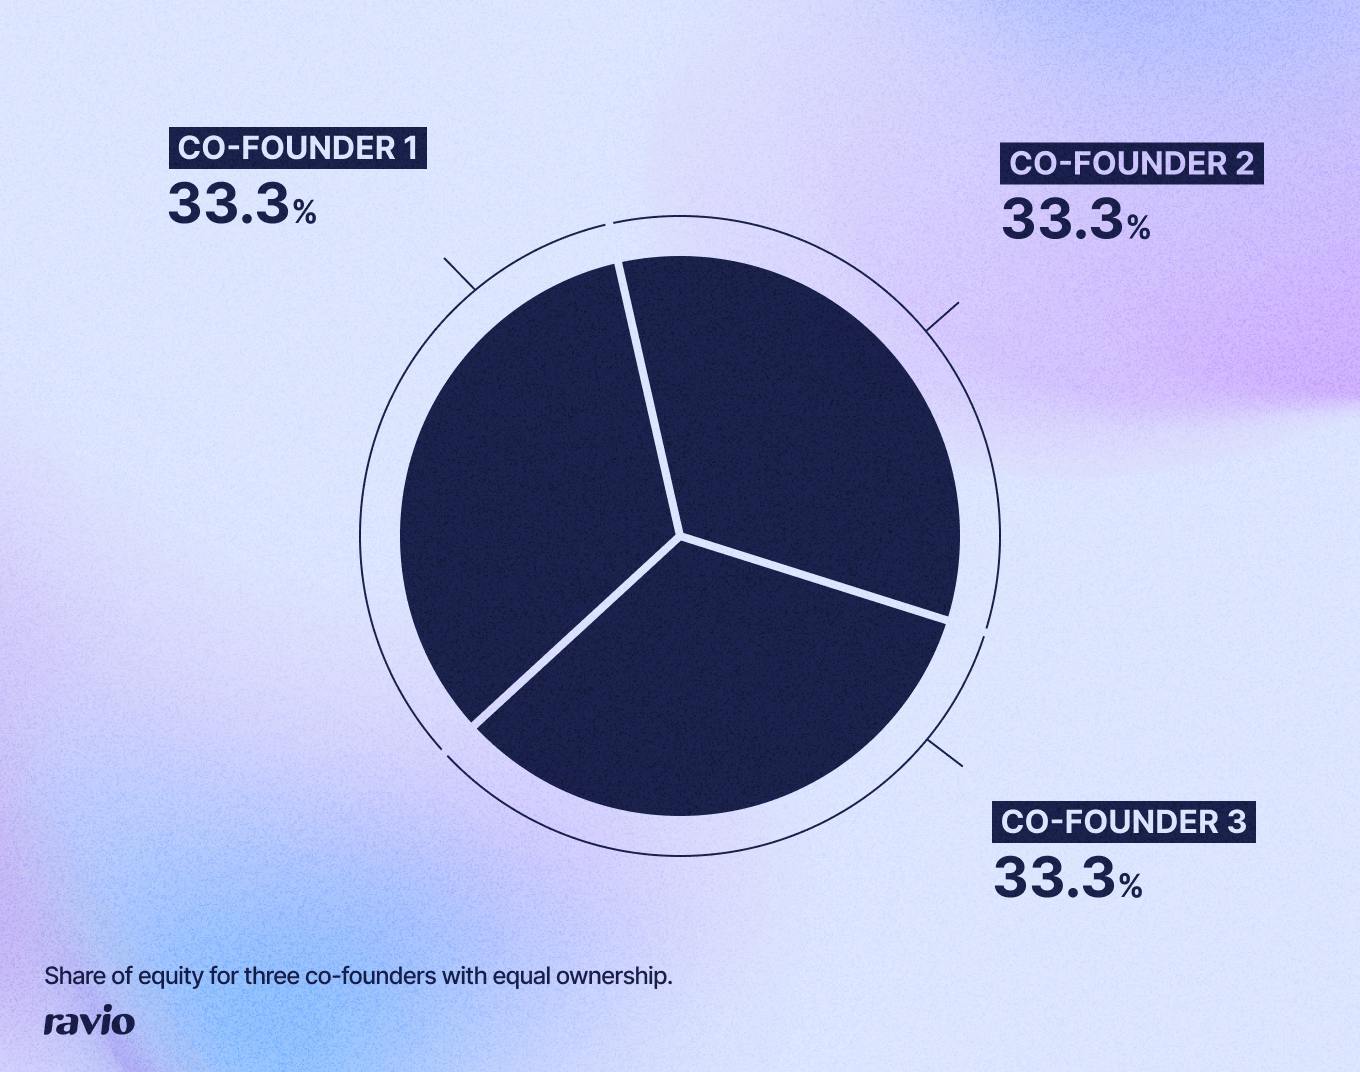 Pie chart showing 33.3% equity owned by each of three co-founders